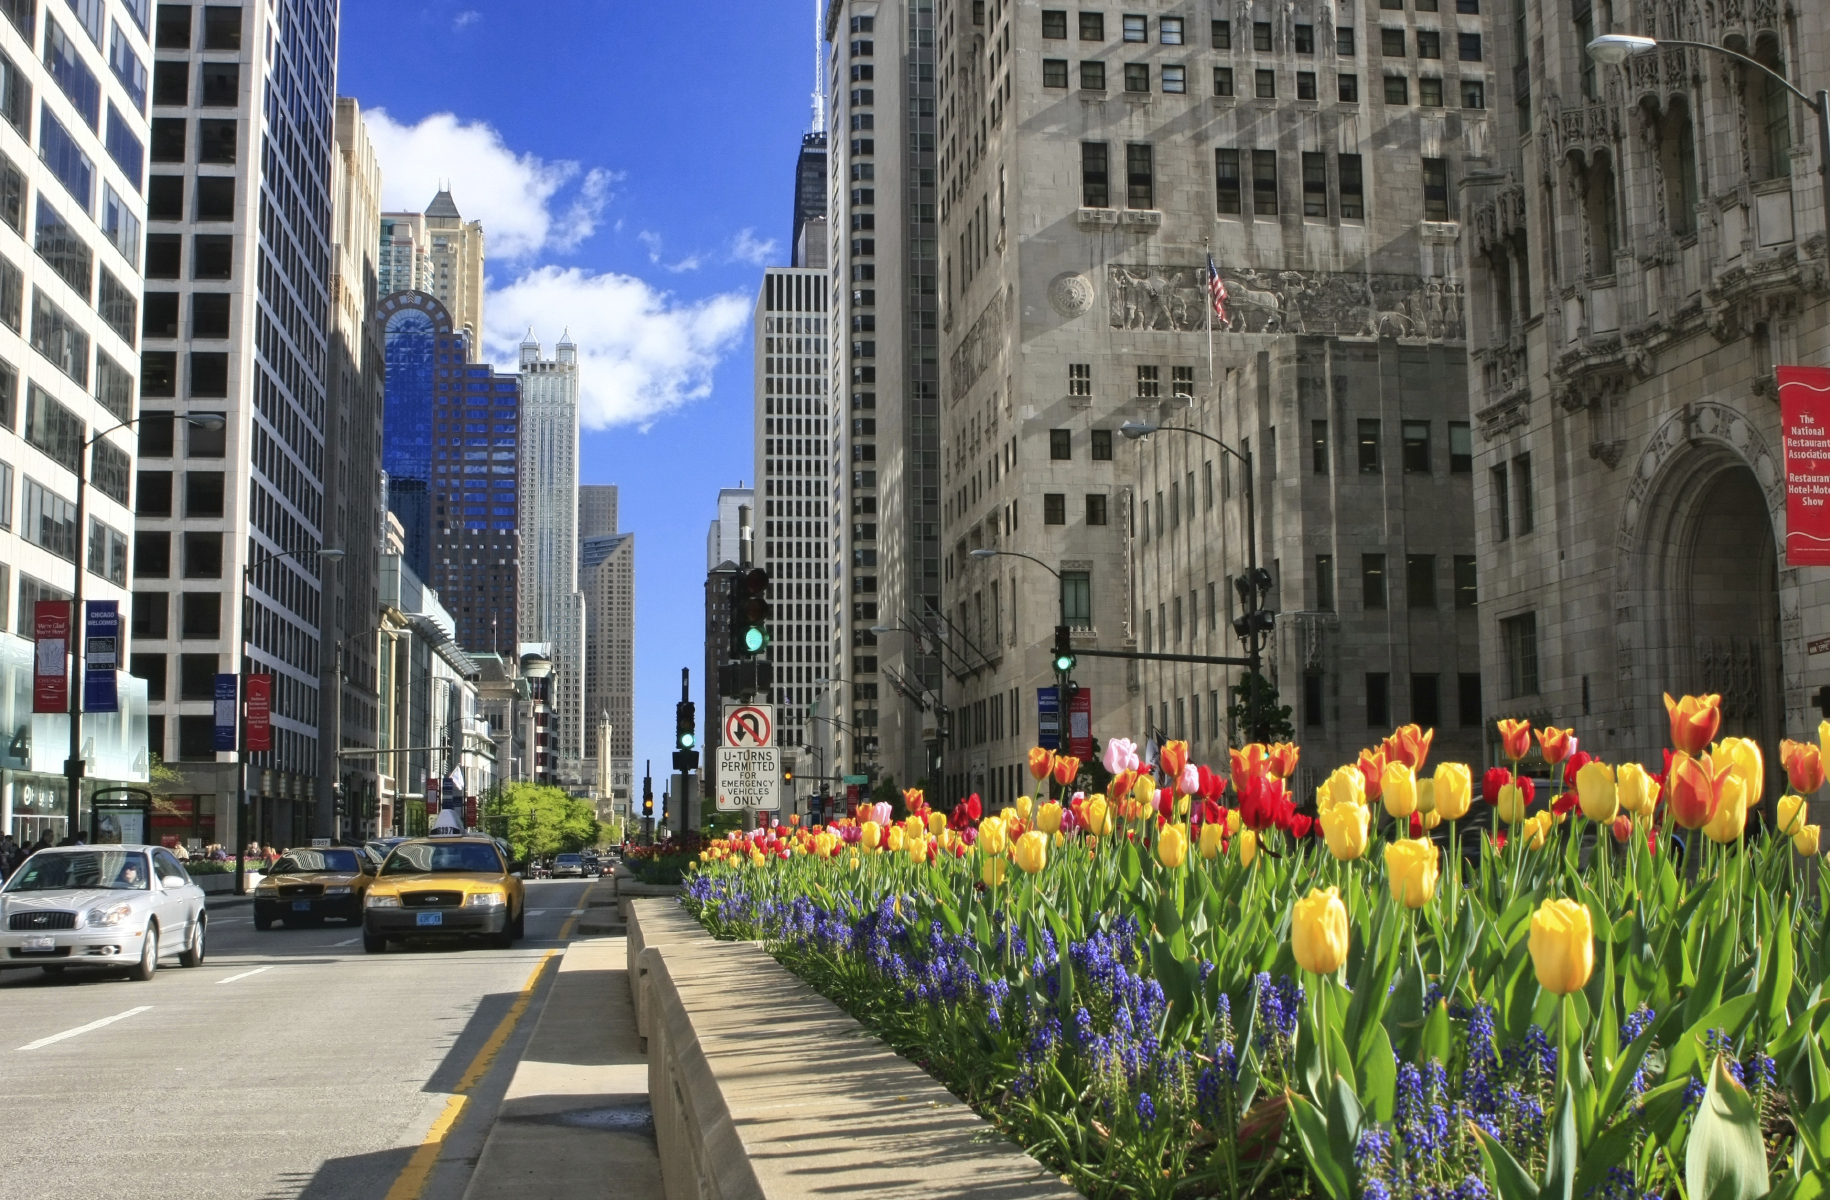 Hotels in chicago close to magnificent mile